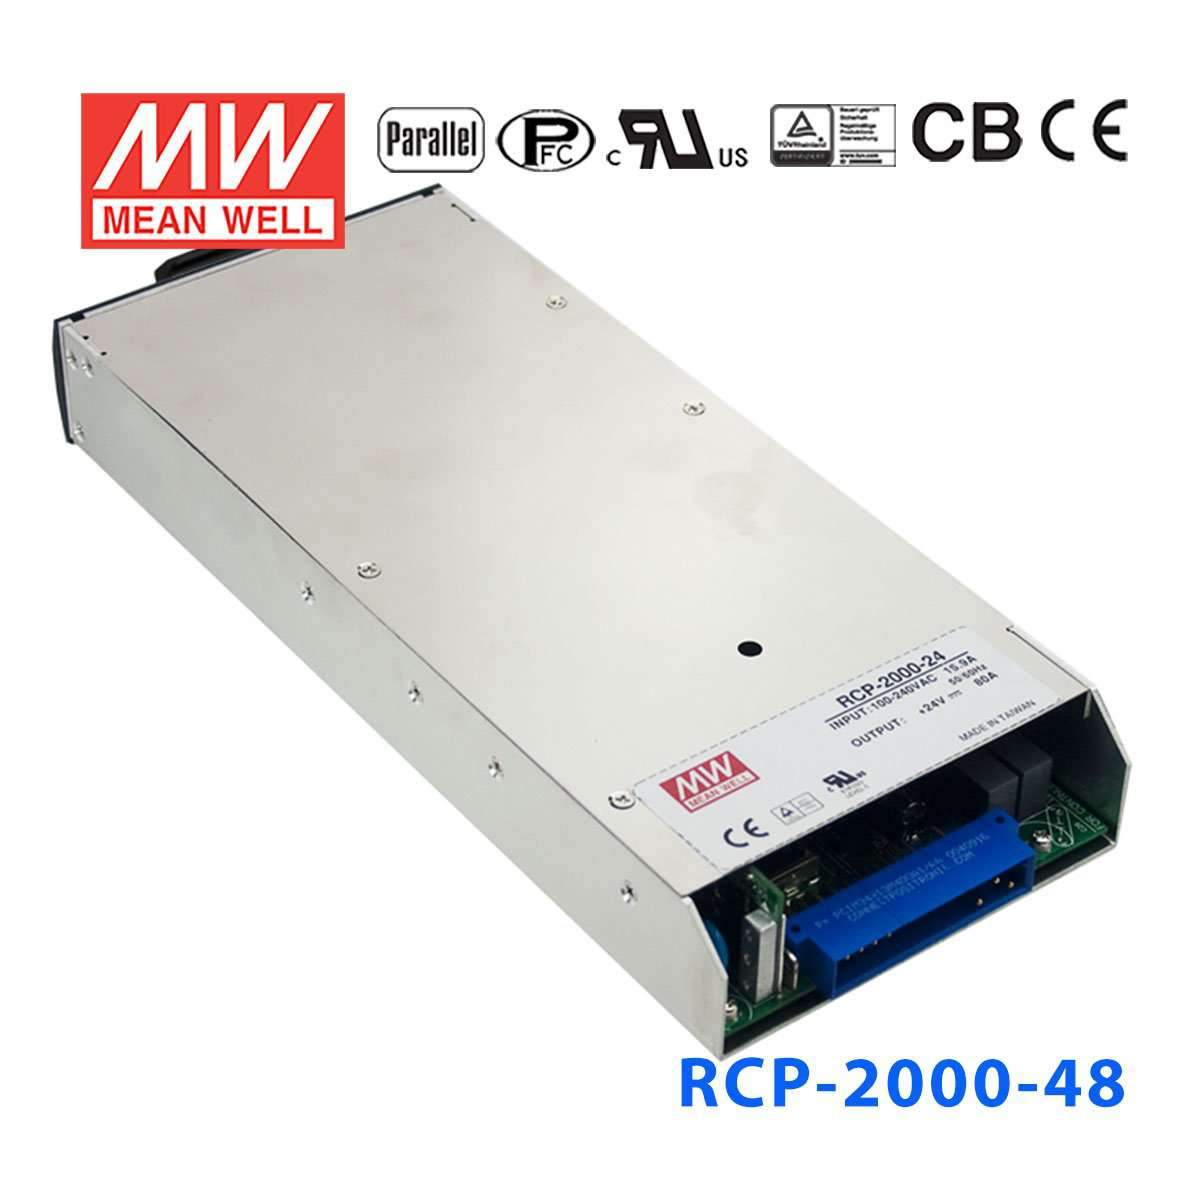 Mean Well RCP-2000-48 power supply 2000W 48V 42A